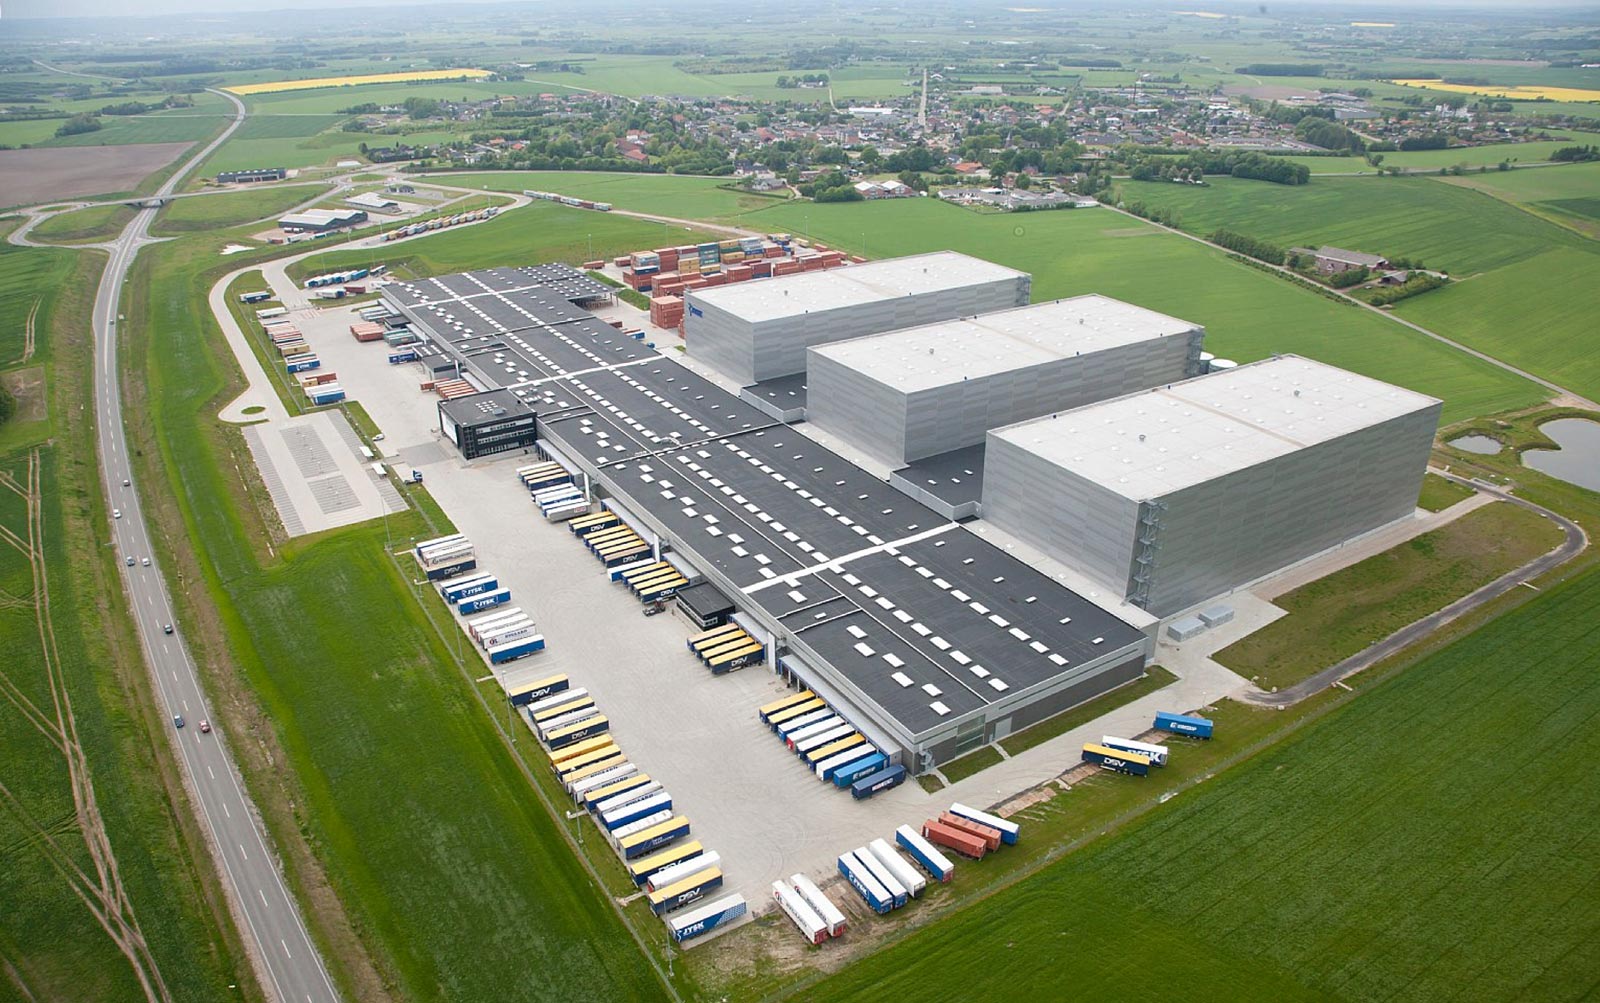 JYSK Uldum - Distribution centre - JYSK’s new 64,000 m2 distribution centre is attractively situated in the open countryside.